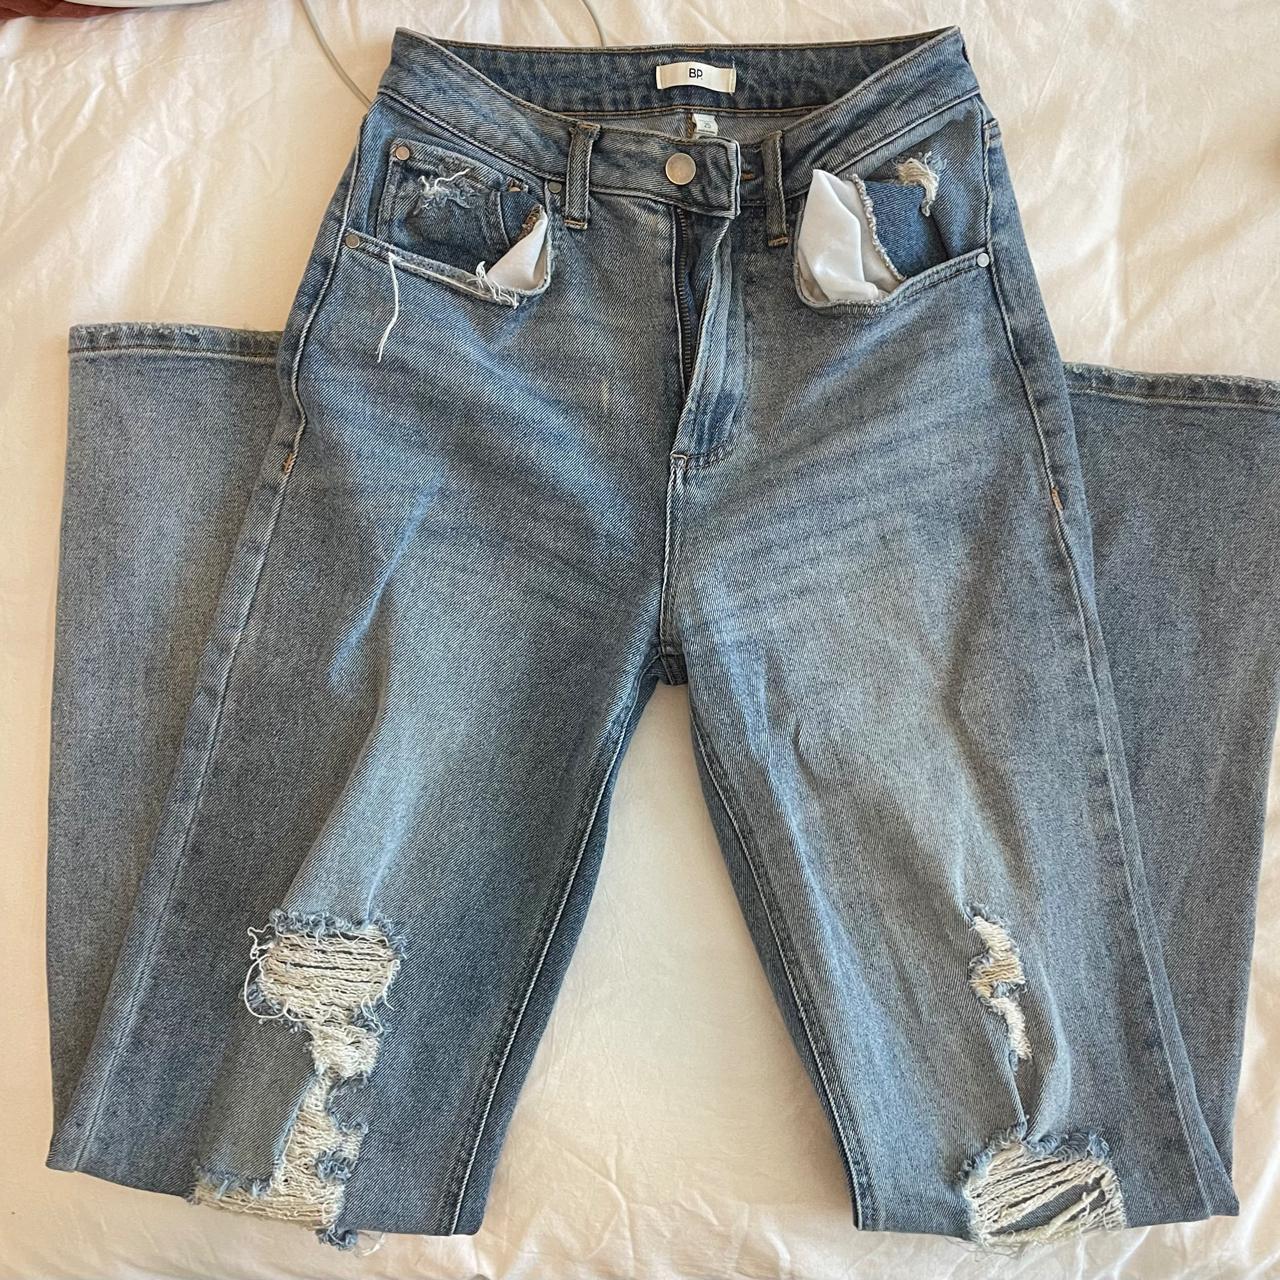 Nordstrom BP straight-legged jeans Size 25 but fits... - Depop